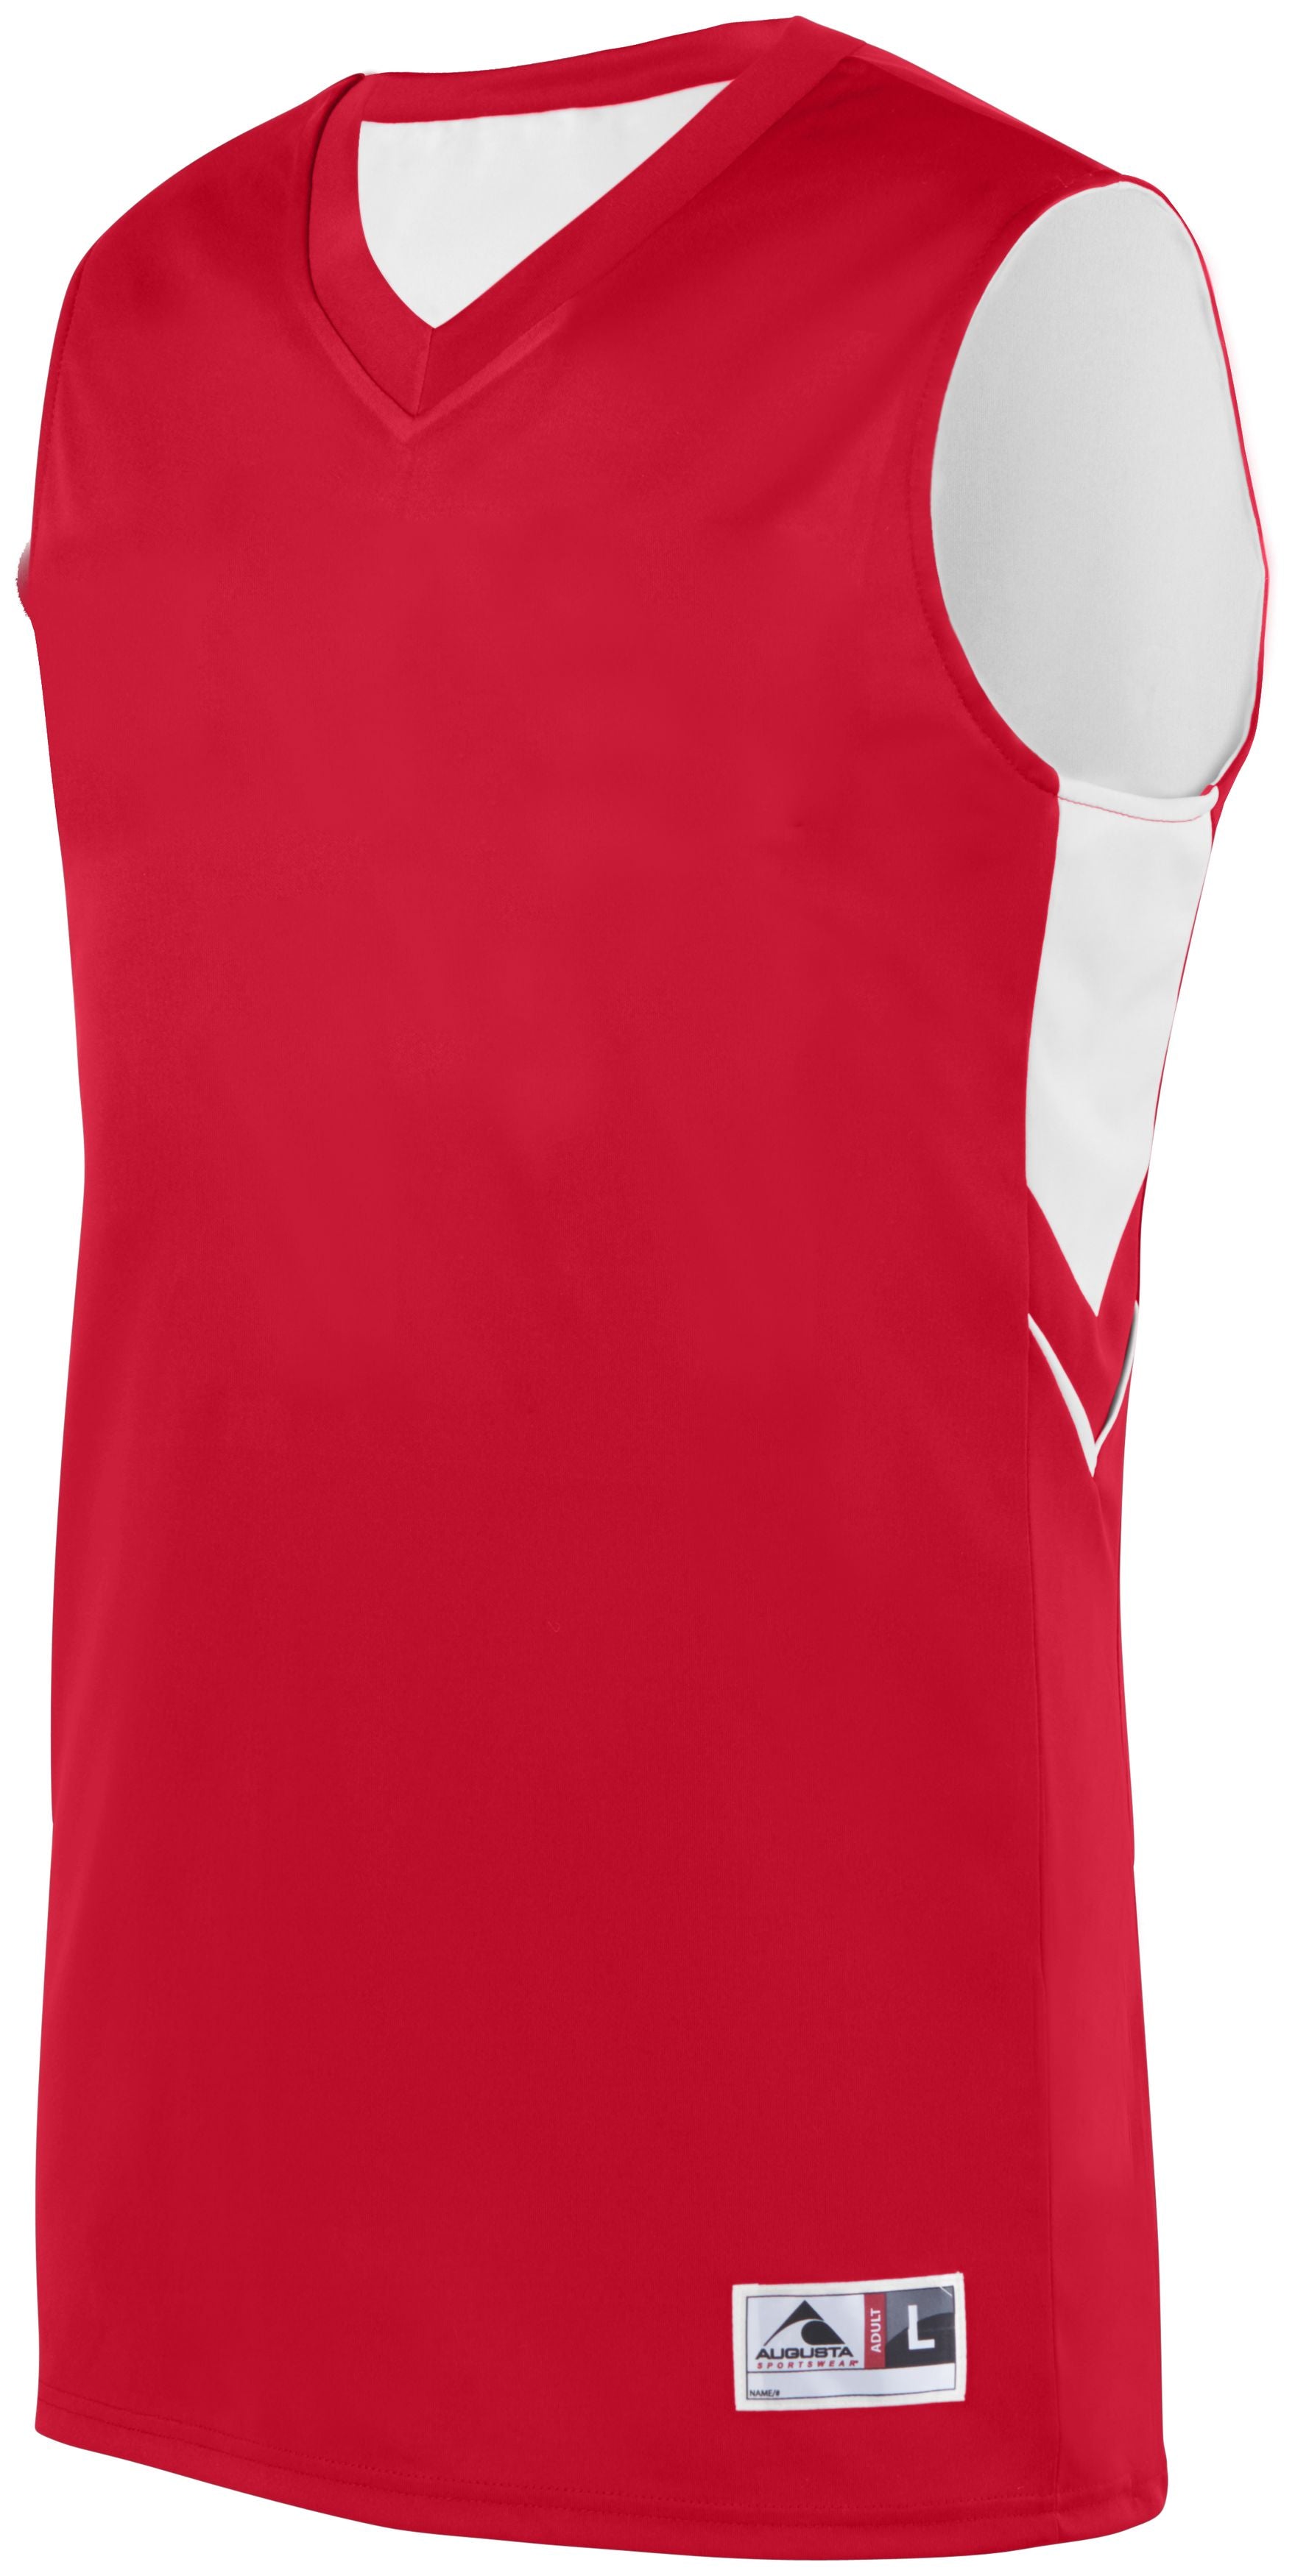 Augusta Sportswear Youth Alley-Oop Reversible Jersey in Red/White  -Part of the Youth, Youth-Jersey, Augusta-Products, Basketball, Shirts, All-Sports, All-Sports-1 product lines at KanaleyCreations.com